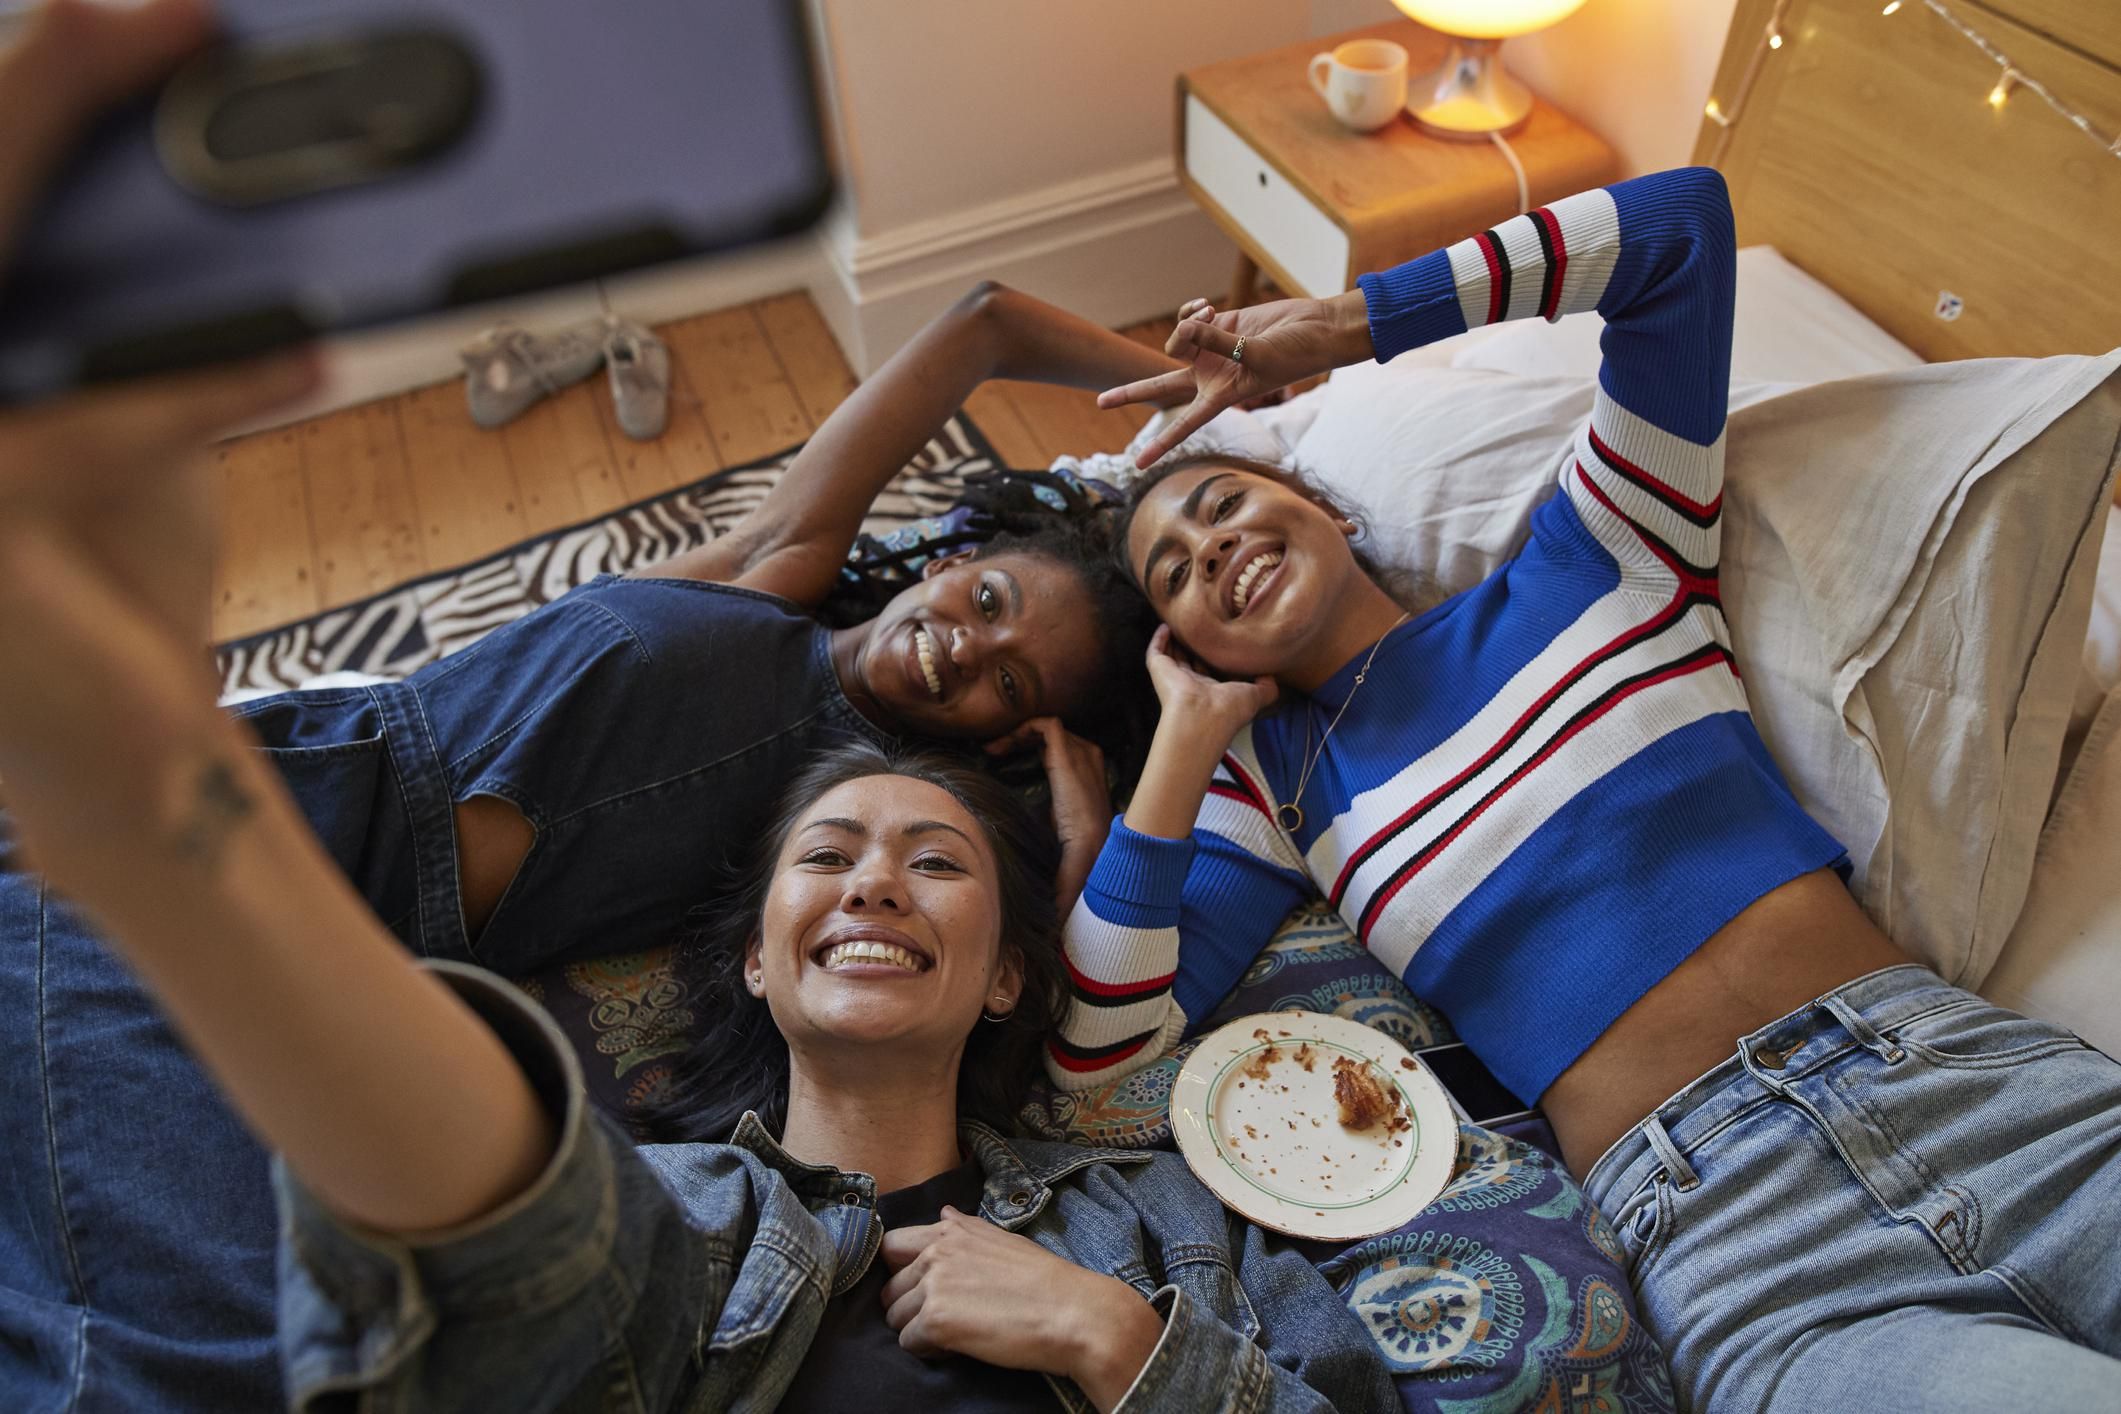 15 Fun Things To Do For A Grown Ass Sleepover